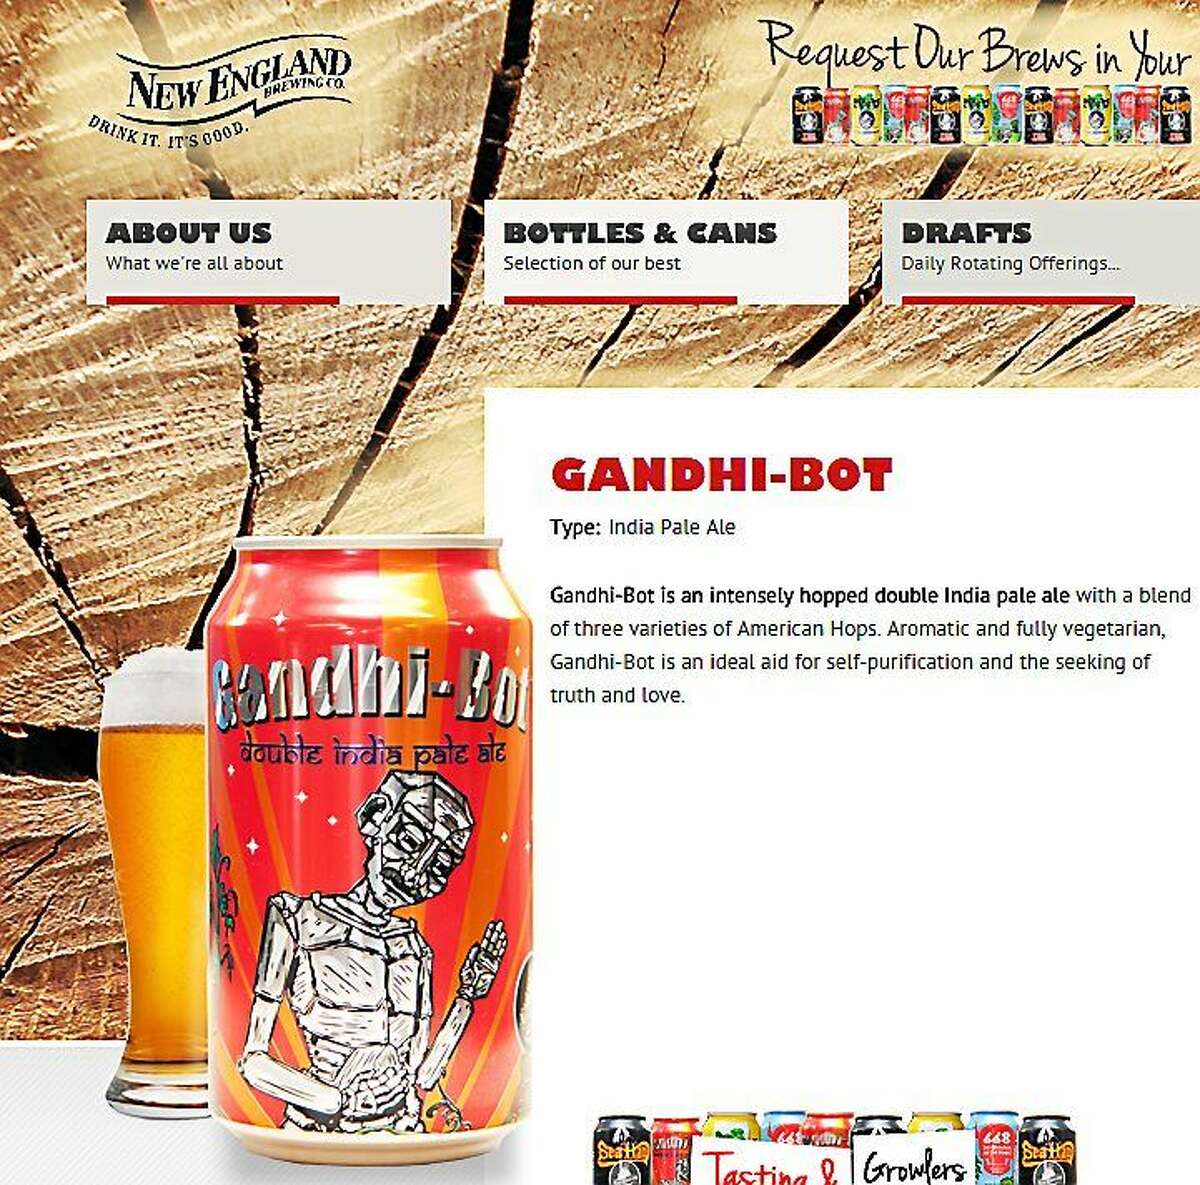 A screenshot of the New England Brewing Company's website shows the Gandhi-Bot label.